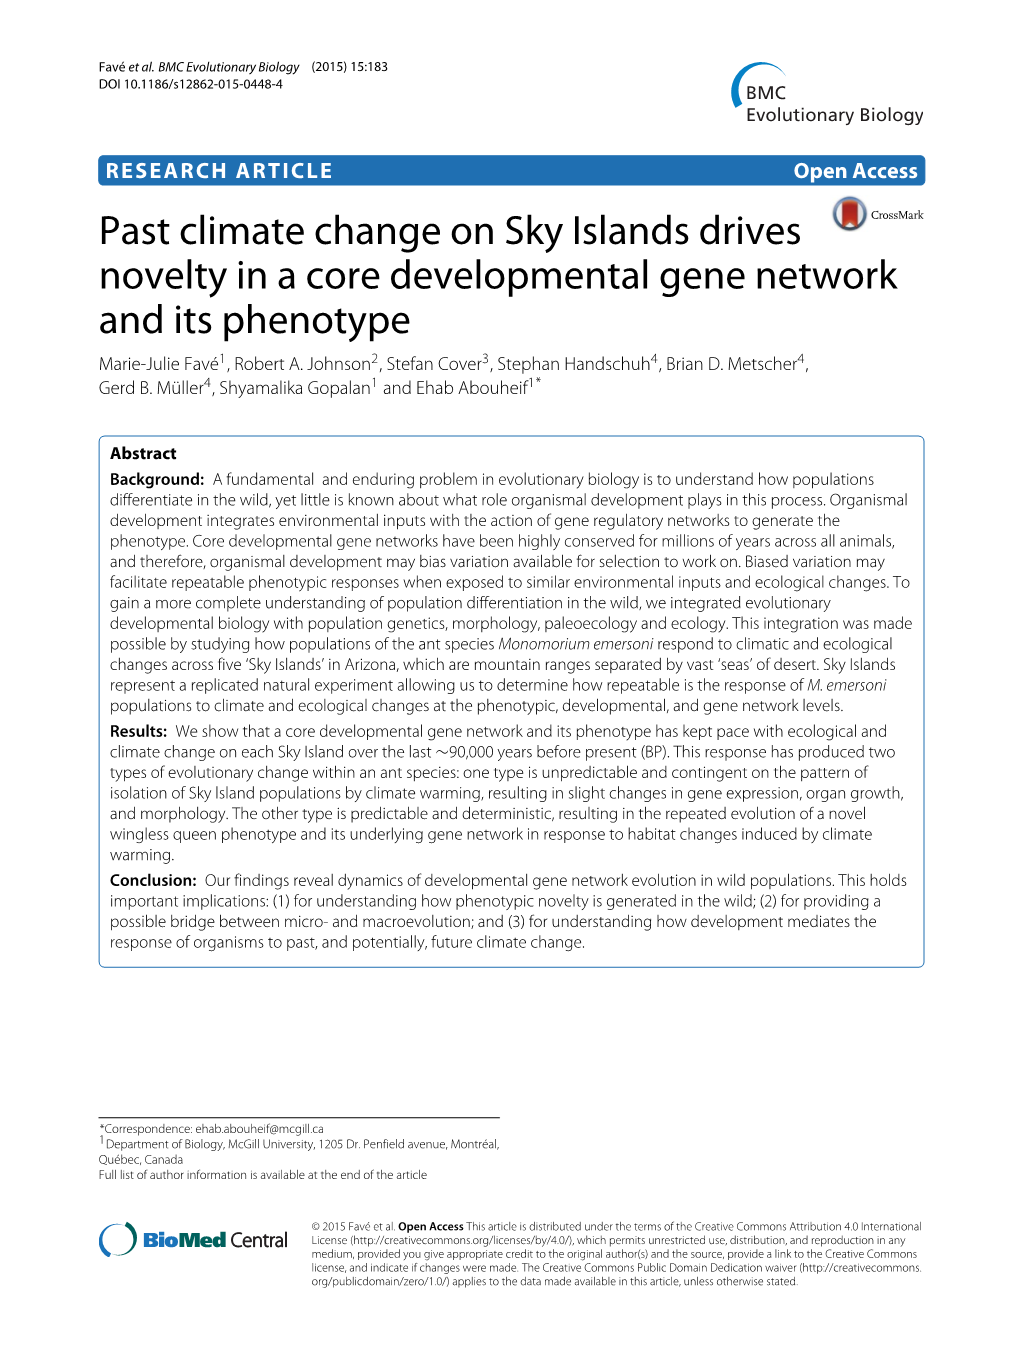 Past Climate Change on Sky Islands Drives Novelty in a Core Developmental Gene Network and Its Phenotype Marie-Julie Favé1, Robert A